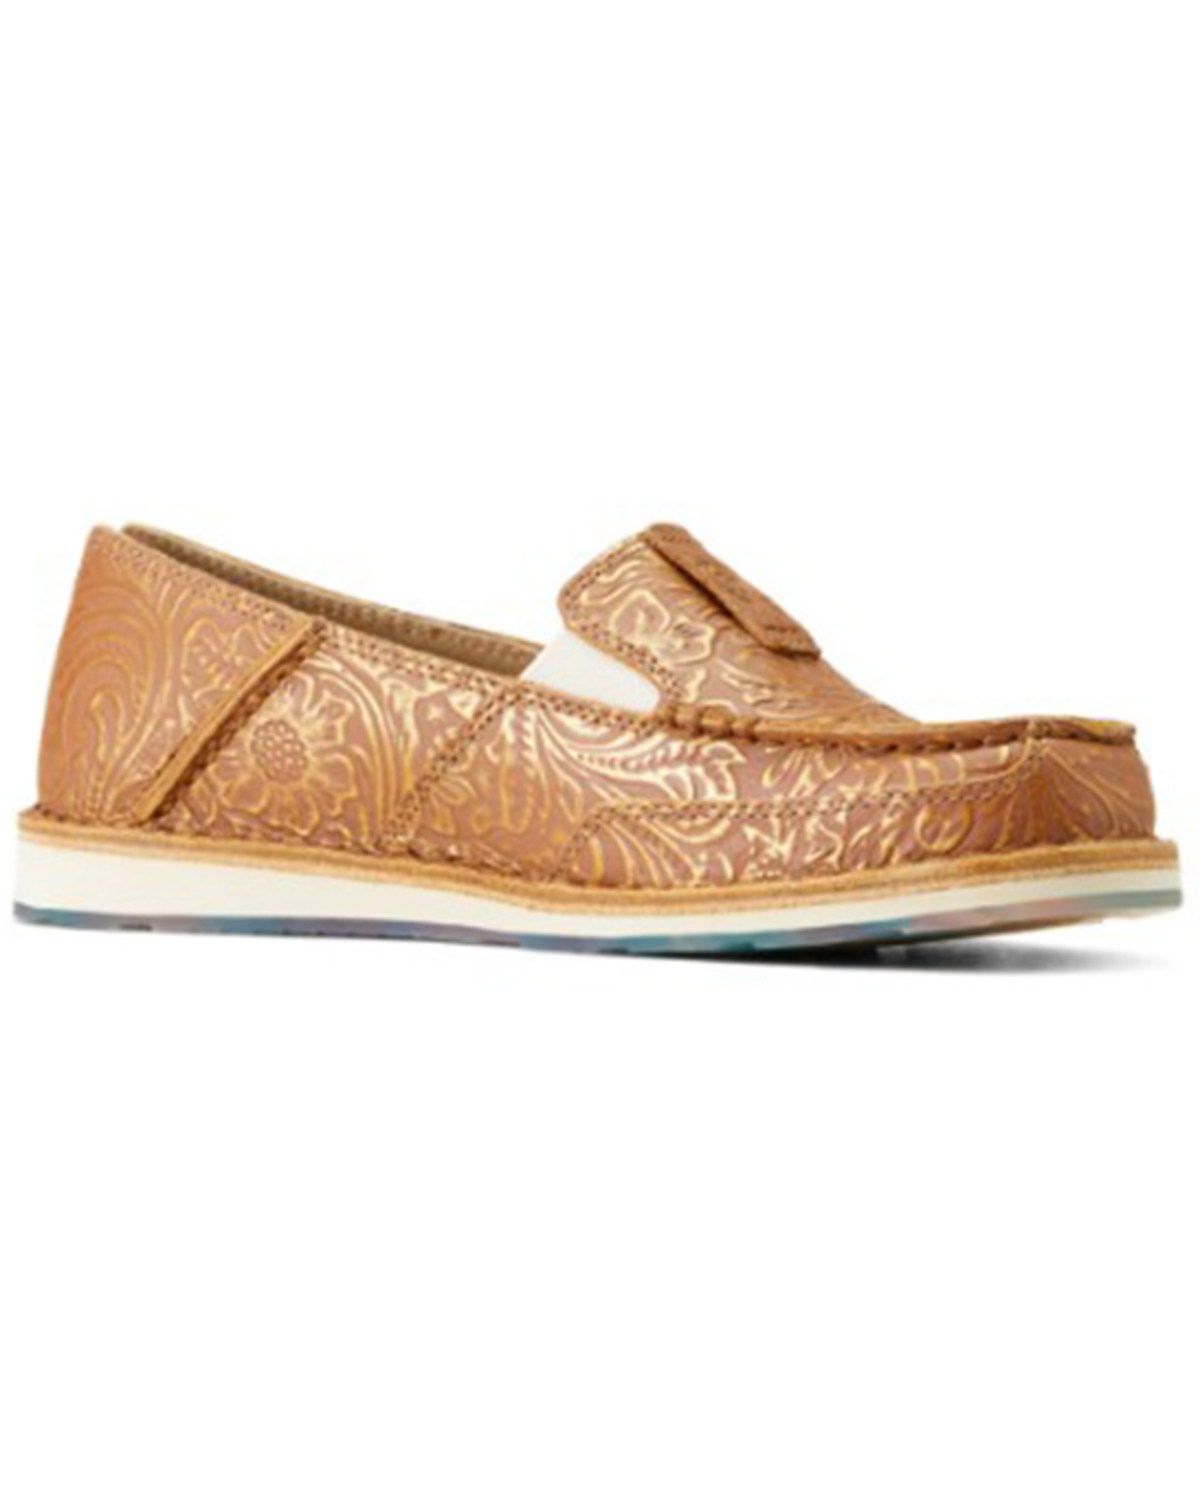 Ariat Women's Tooled Cruiser Casual Shoes - Moc Toe